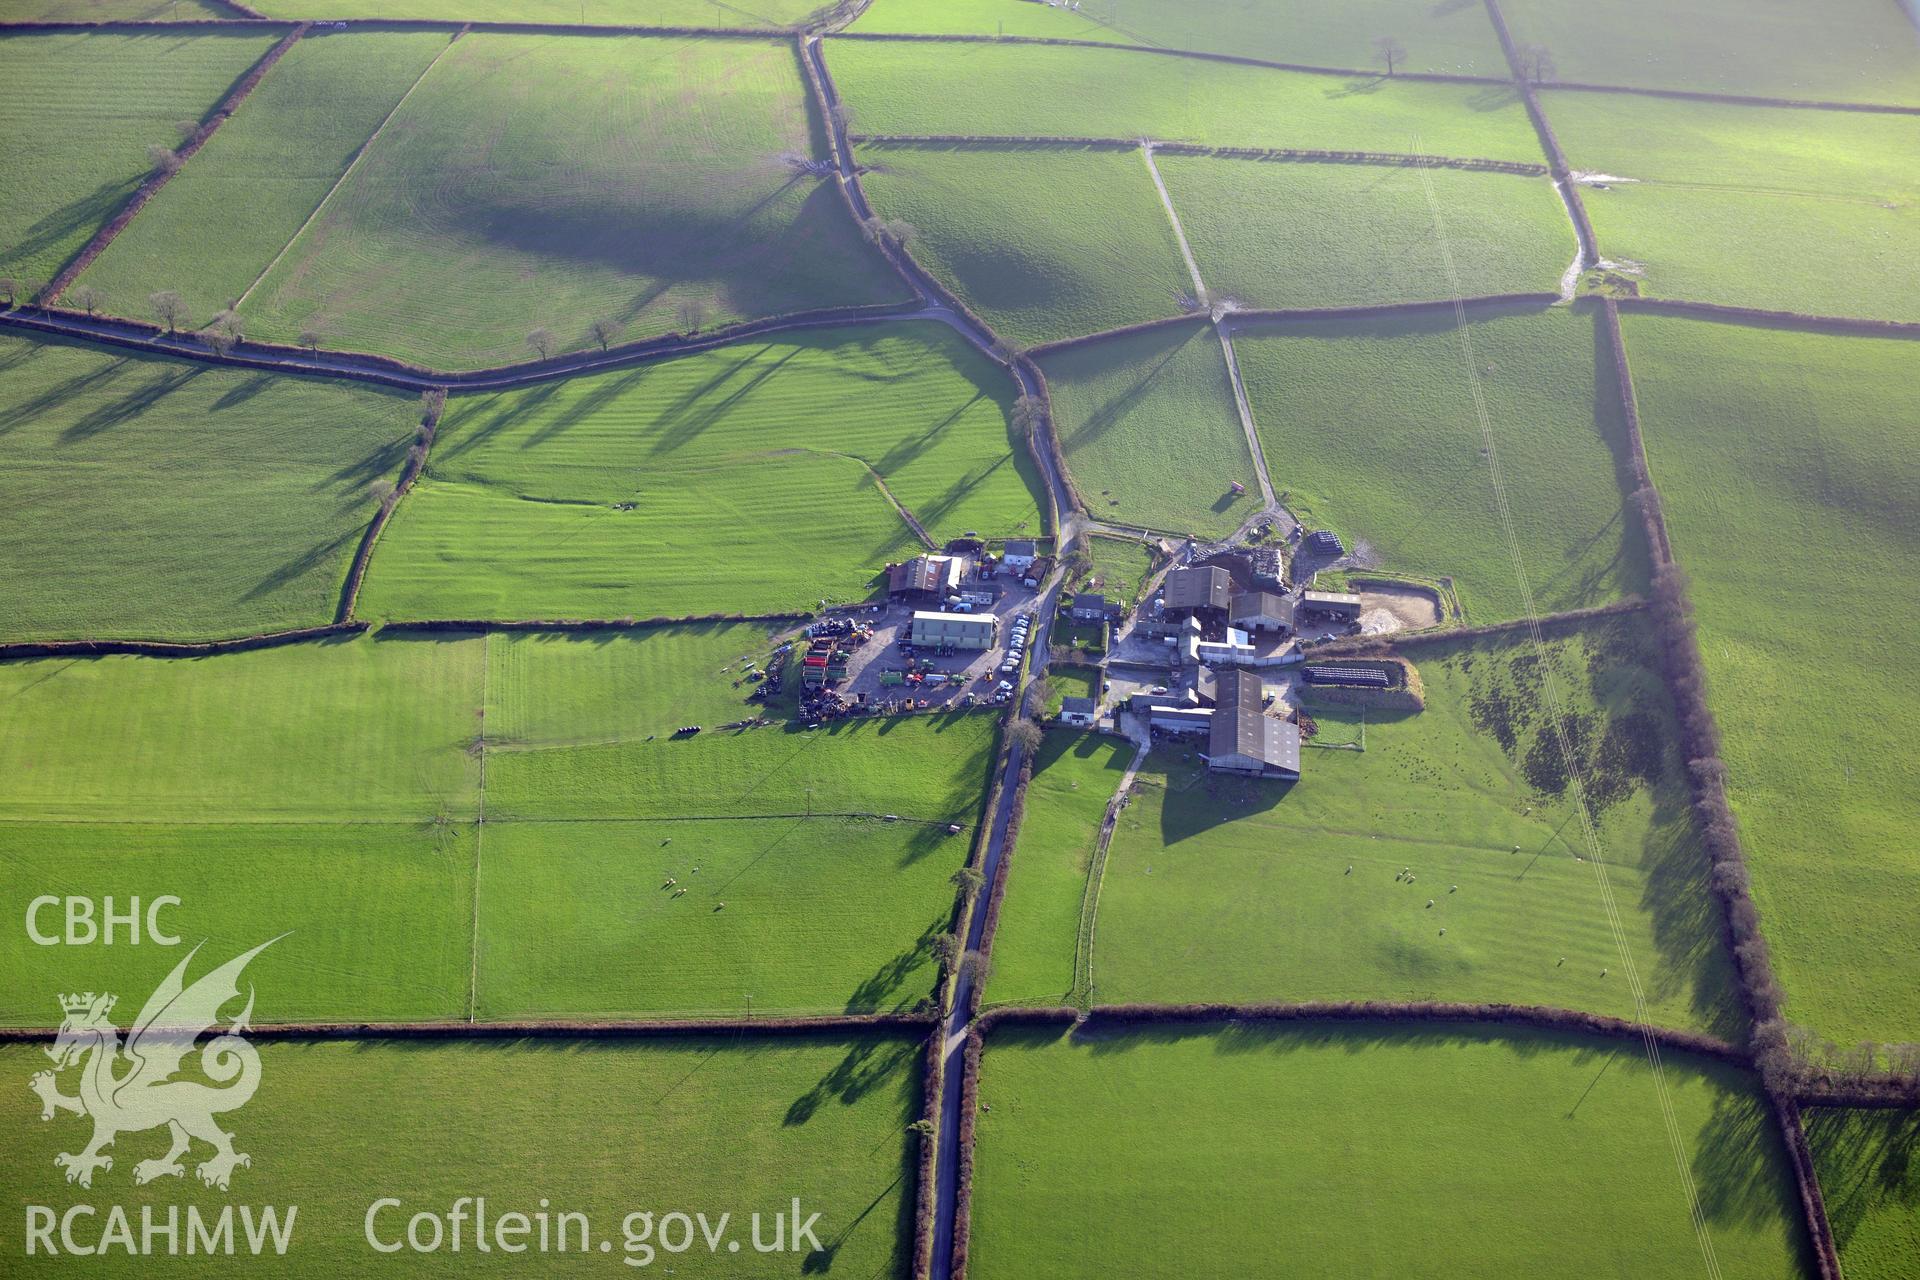 Lanfro Farm, Brynhelyg Mound and deserted rural settlement. Oblique aerial photograph taken during the Royal Commission's programme of archaeological aerial reconnaissance by Toby Driver on 6th January 2018.